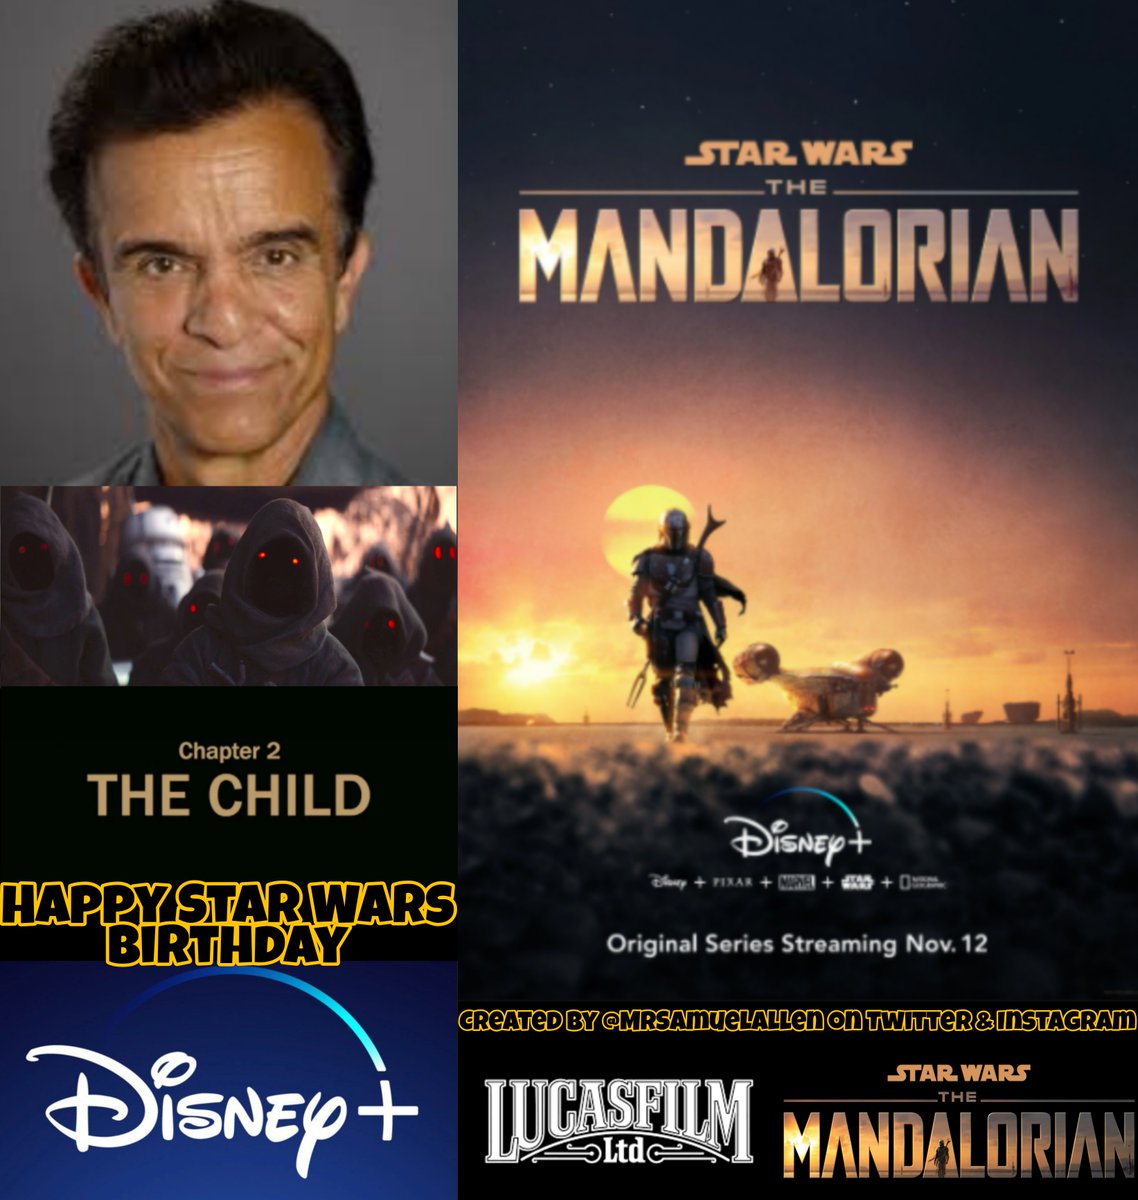 Happy Birthday to #JosephSGriffo, he played a jawa in the 2nd chapter ''The Child'' in the 1st season of the tv series #TheMandalorian. May he have a good one.